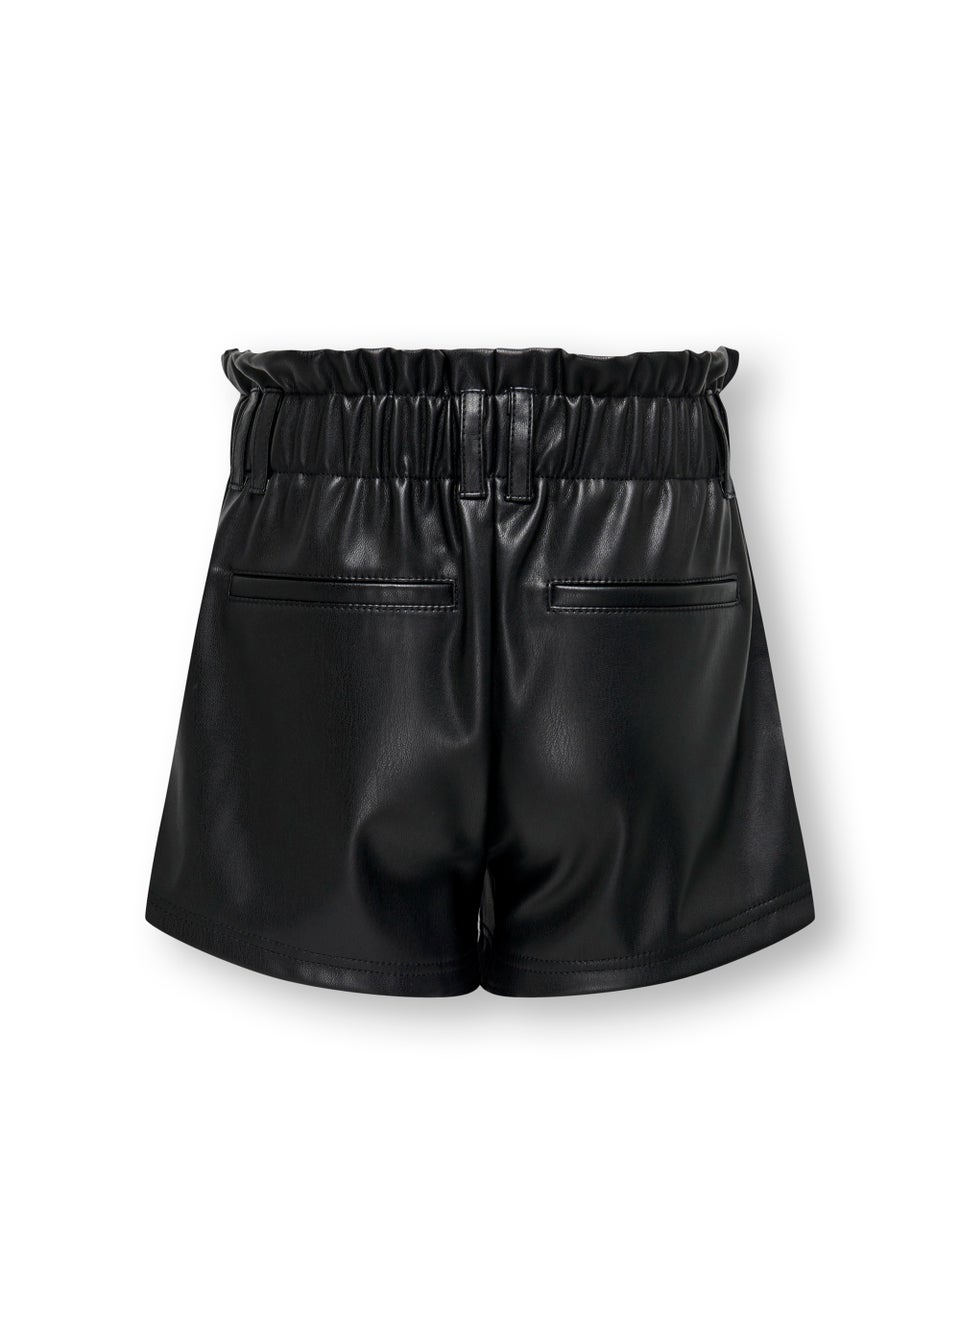 ONLY Girls Black Faux Leather Shorts (6-14yrs)